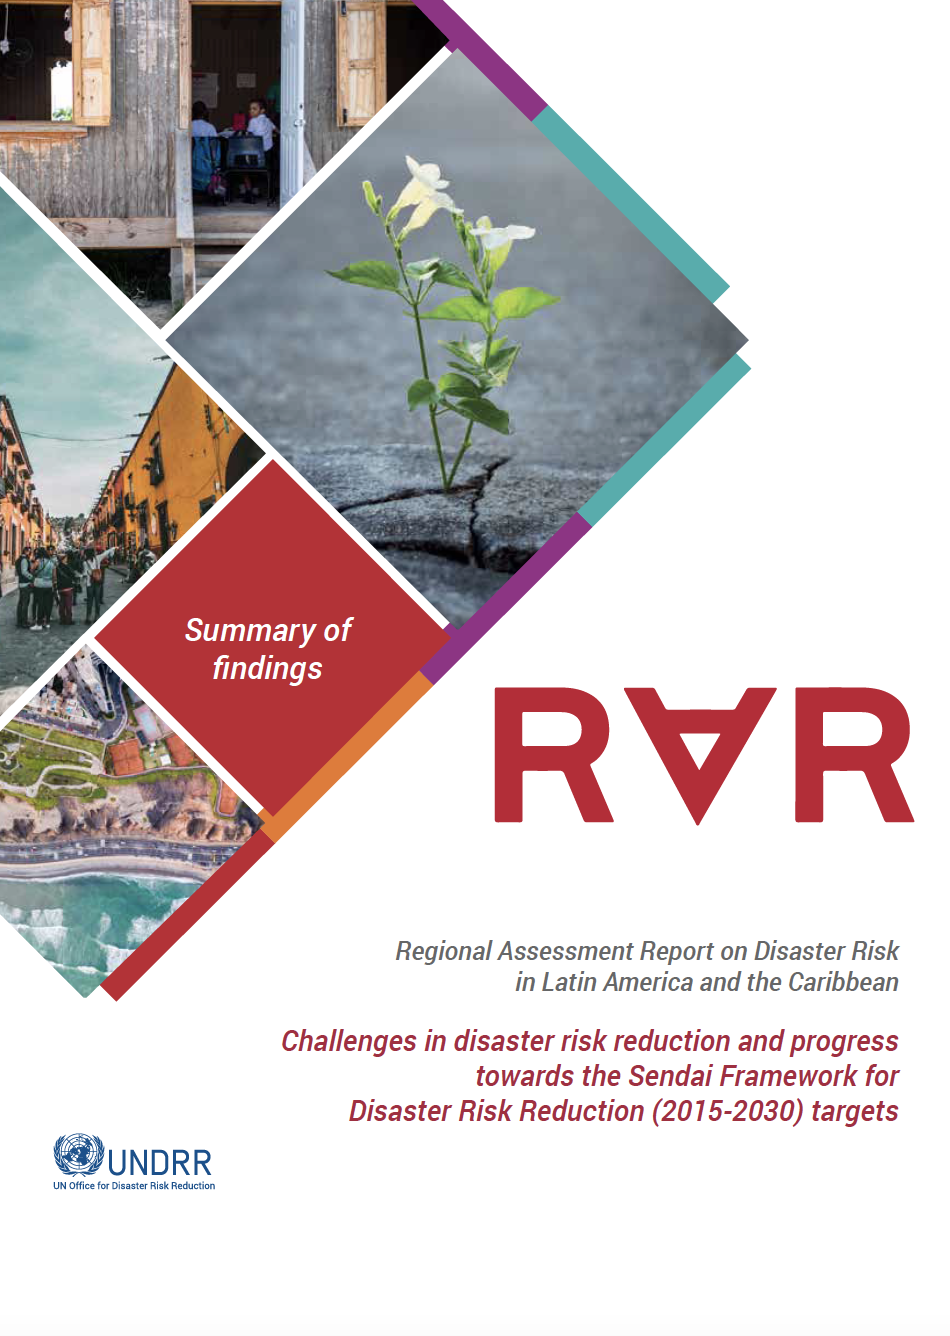 Launch of Regional Assessment Report on Disaster Risk in Latin America and  the Caribbean | UNDRR